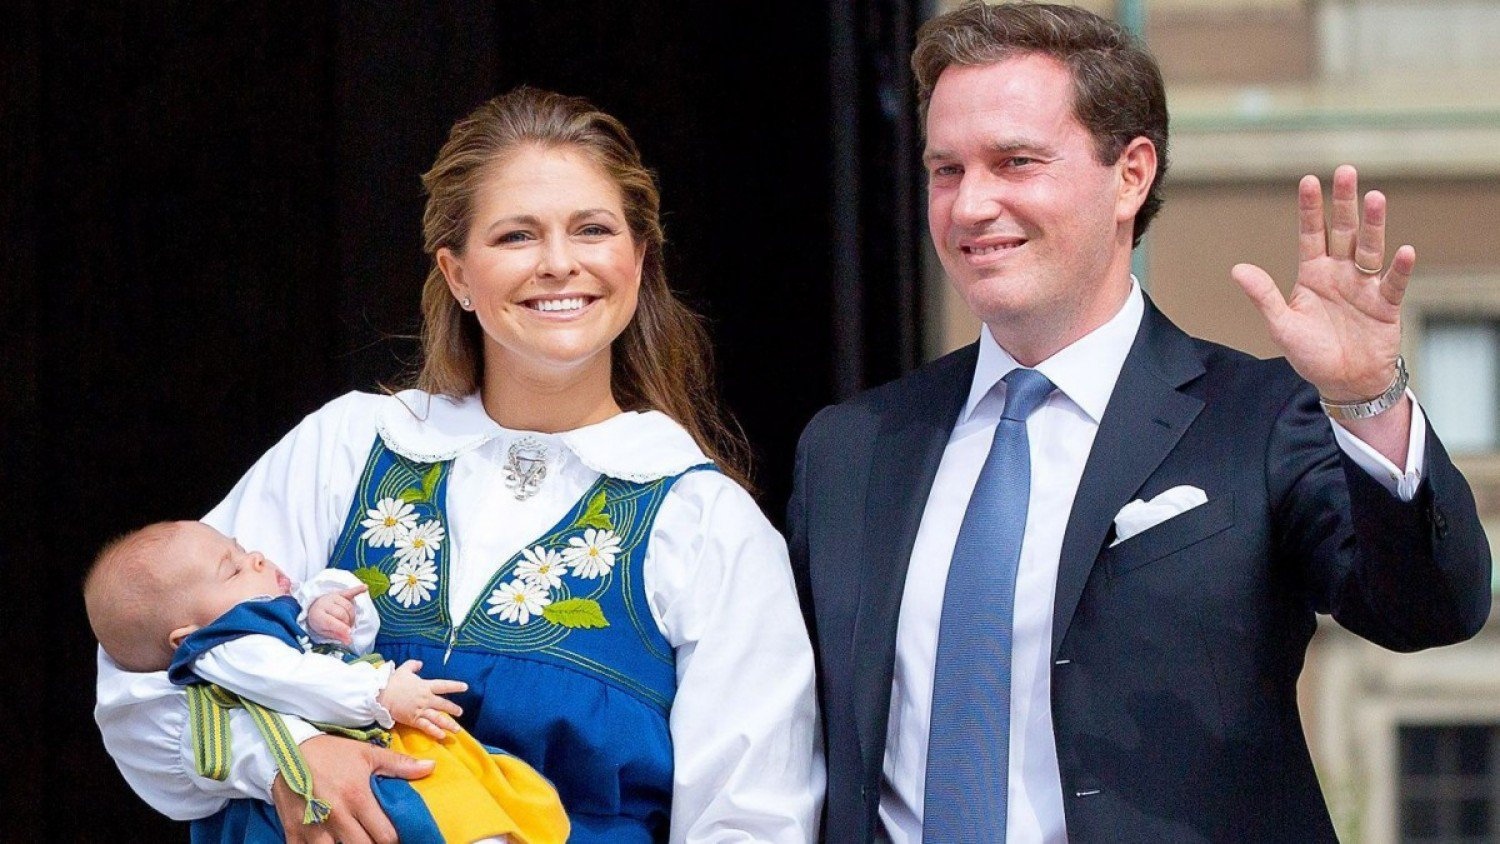 Princess Madeleine and the family move to Sweden.